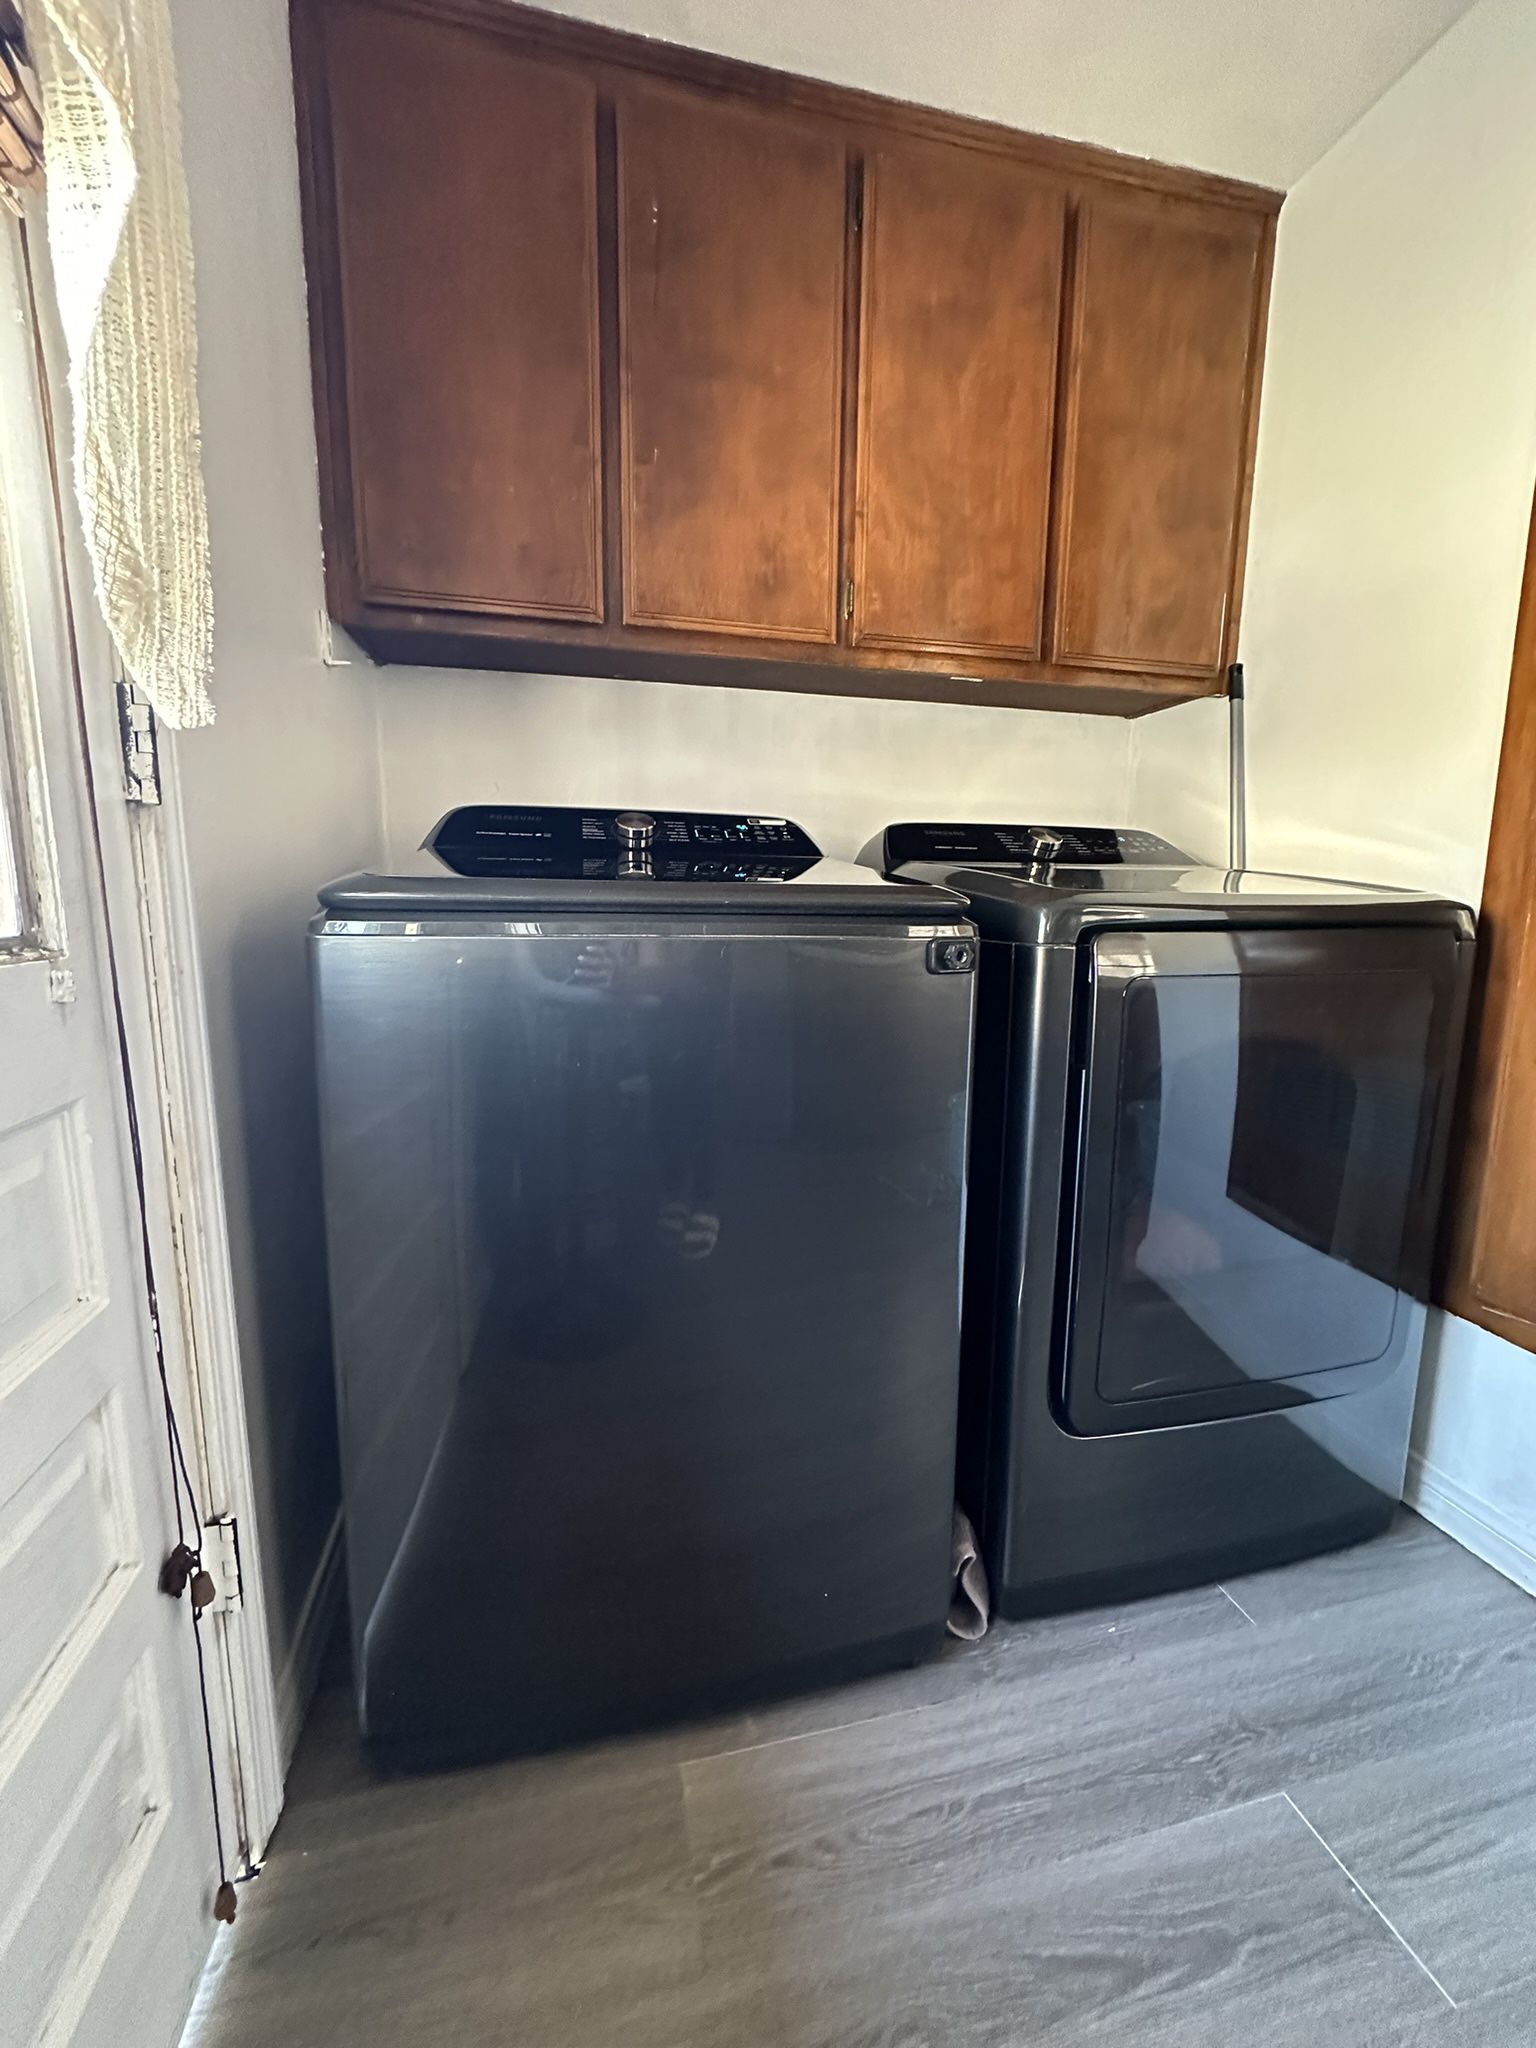 Samsung Washer And Dryer $500 For The Set